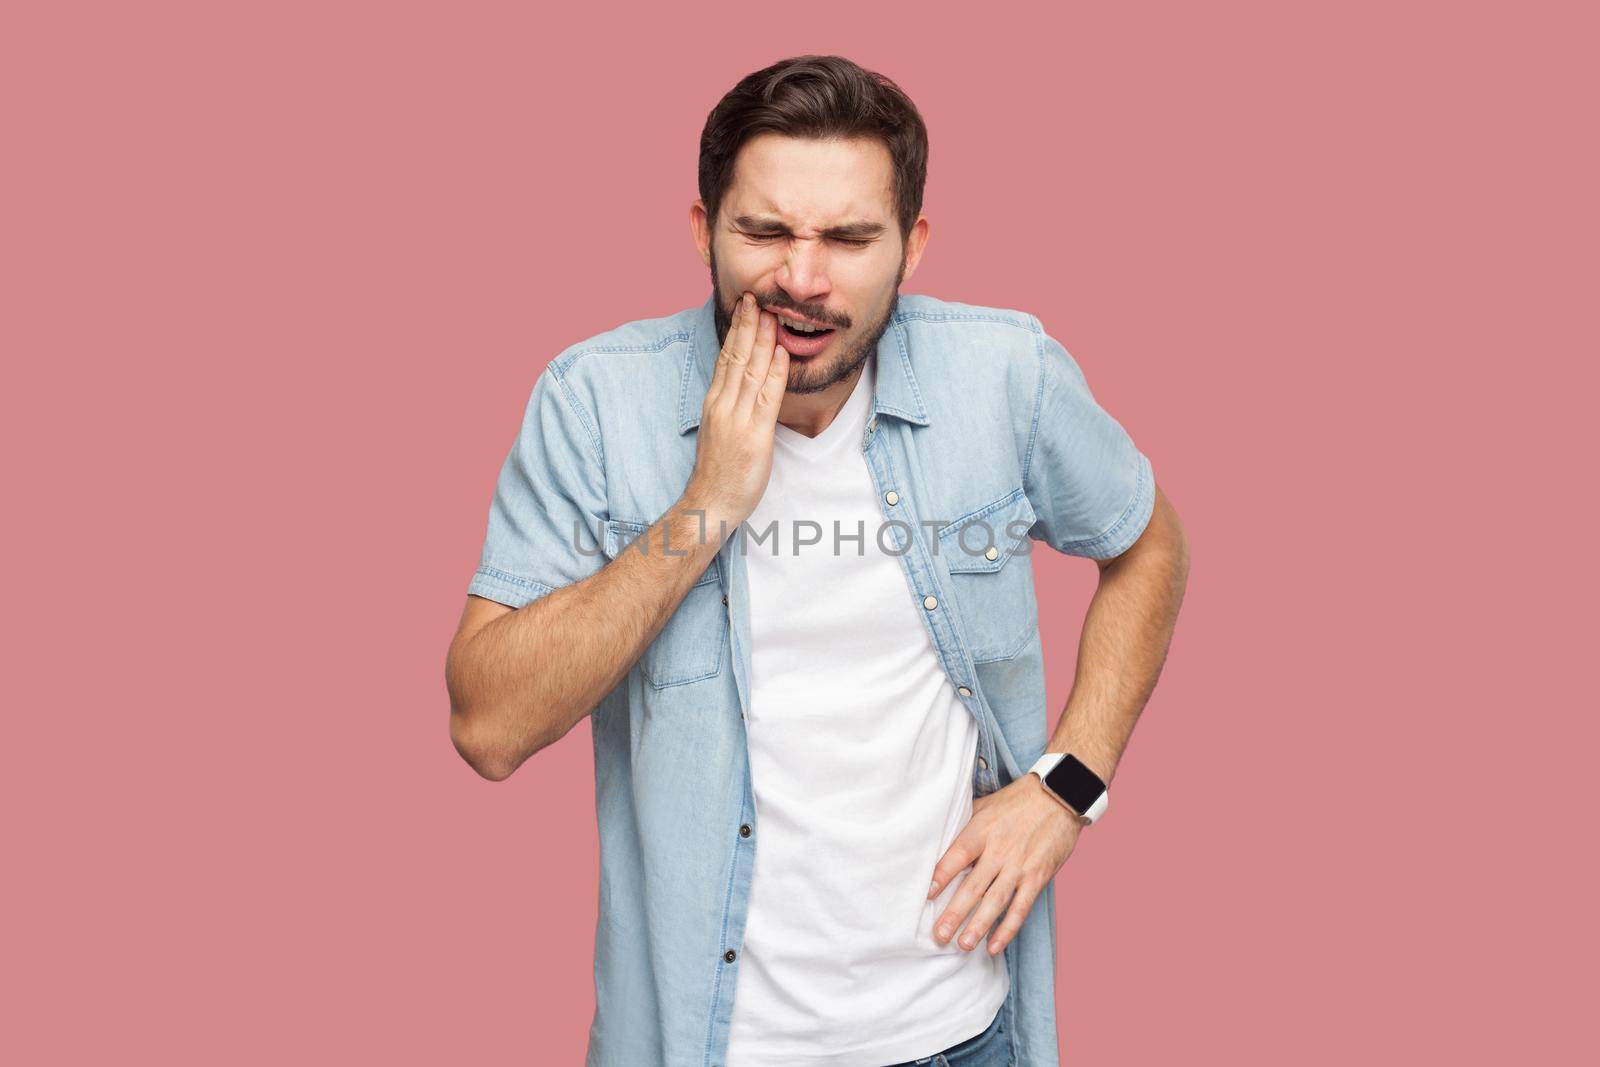 toothache or pain. Portrait of sad sick bearded young man in blue casual style shirt standing and touching his chik because feeling pain on tooth. indoor studio shot, isolated on pink background.